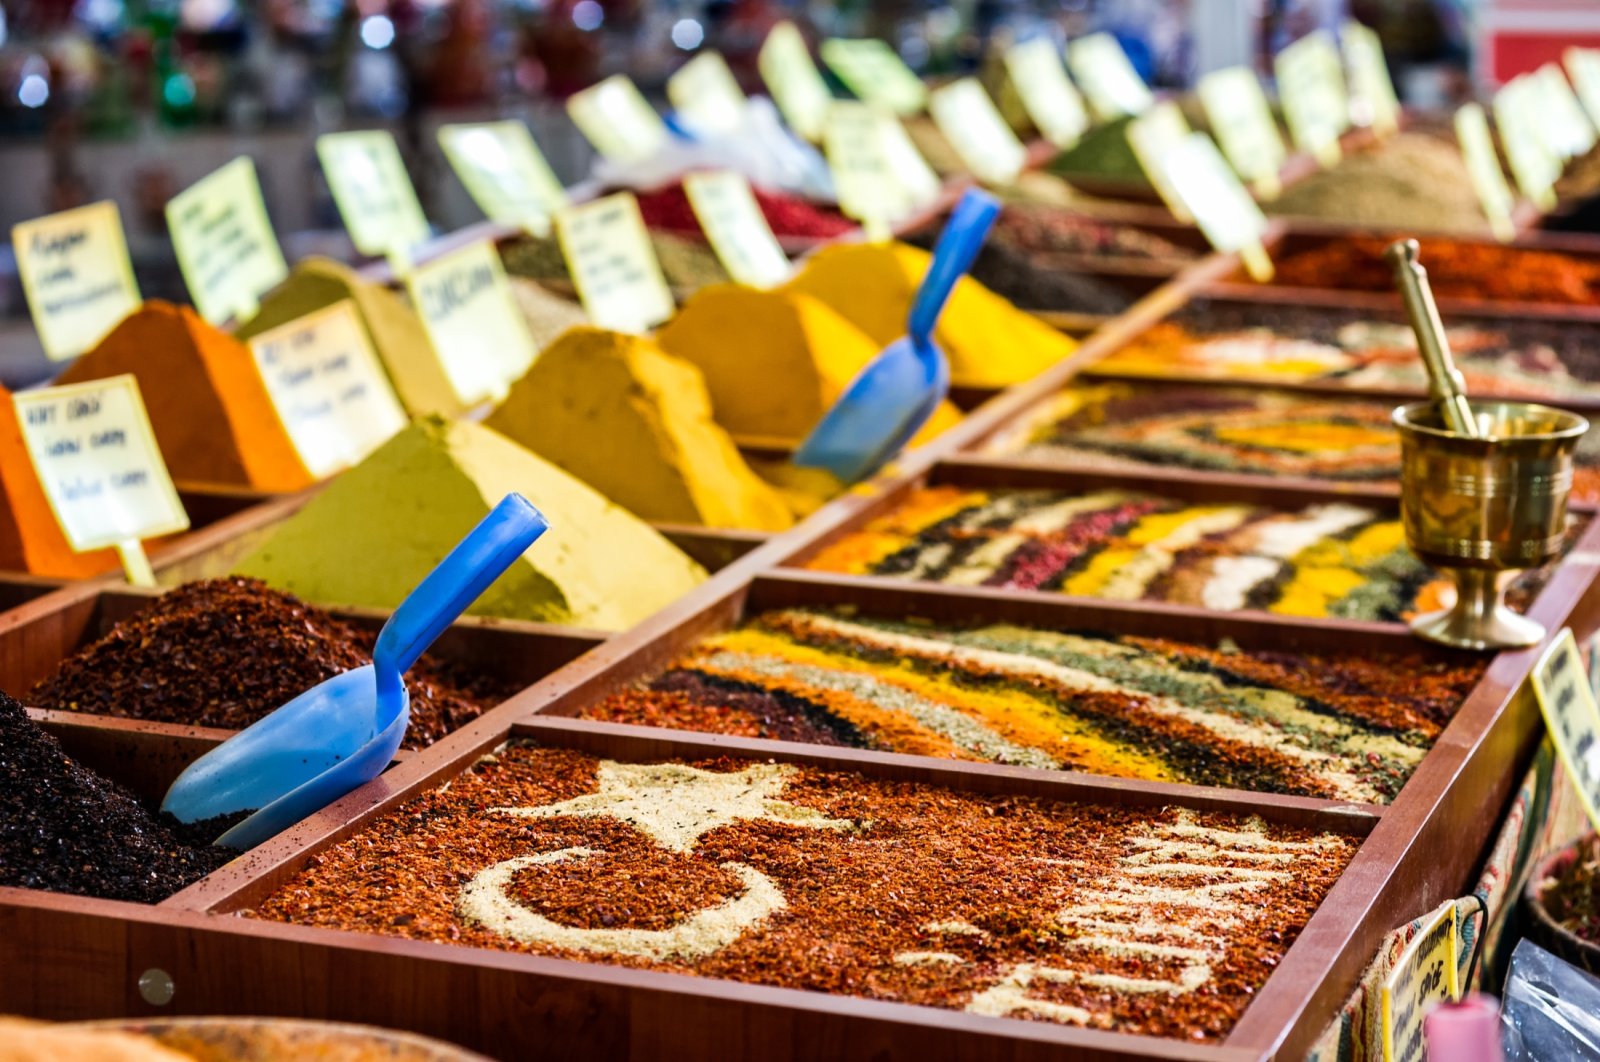 Turks truly have a specific way of shopping for the foods they consume and pay special attention to ensuring what they eat is seasonal and top quality. (Shutterstock Photo)